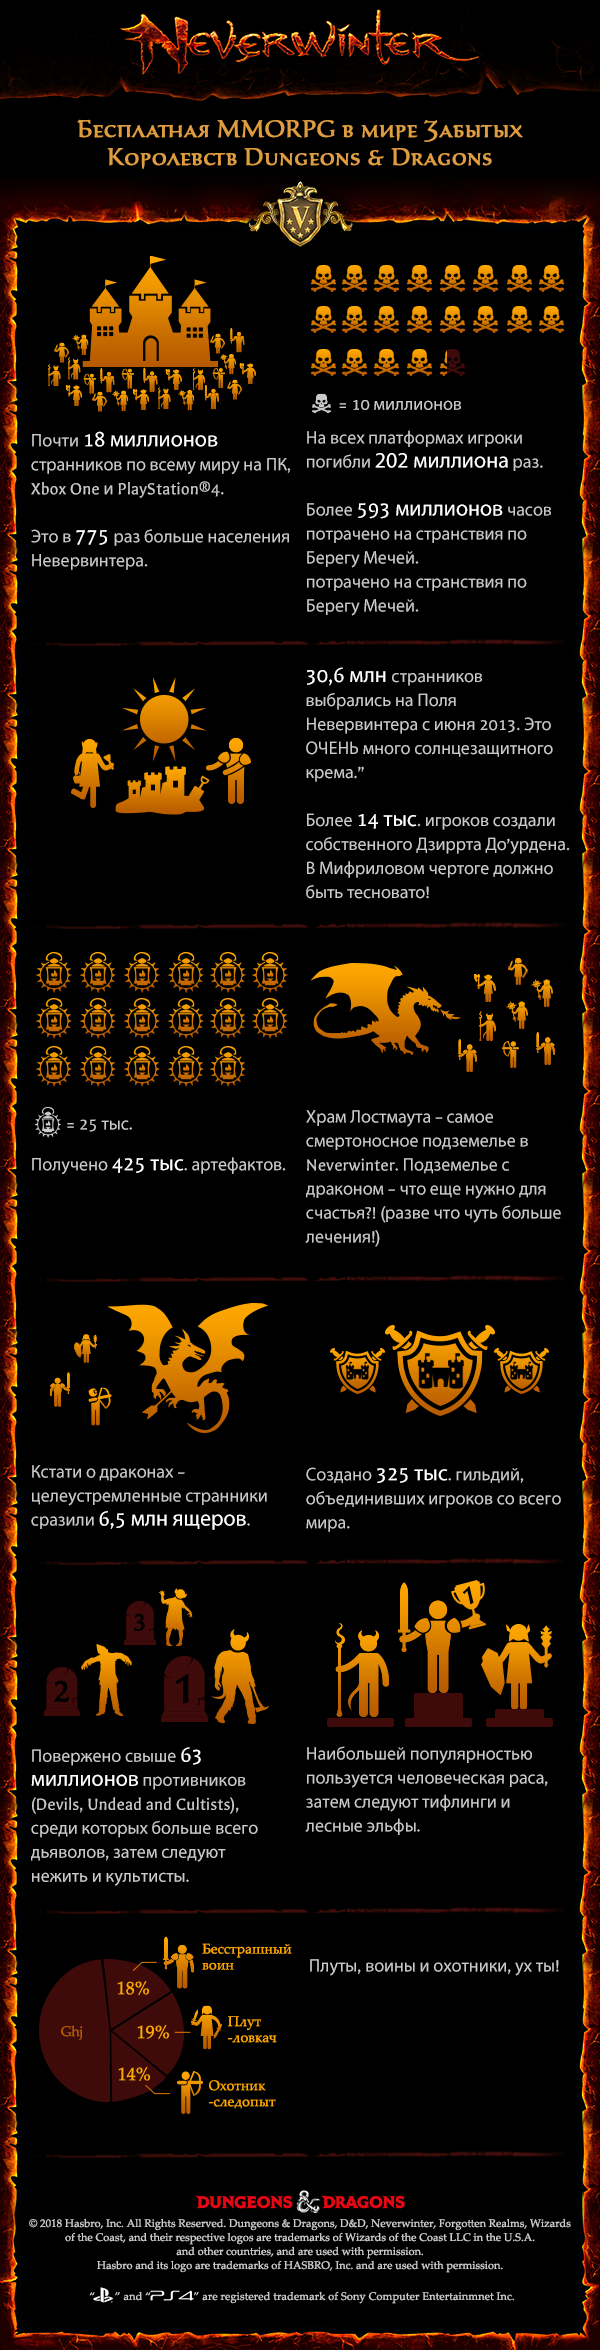 072118-NW_infographic_20180615_RU.png